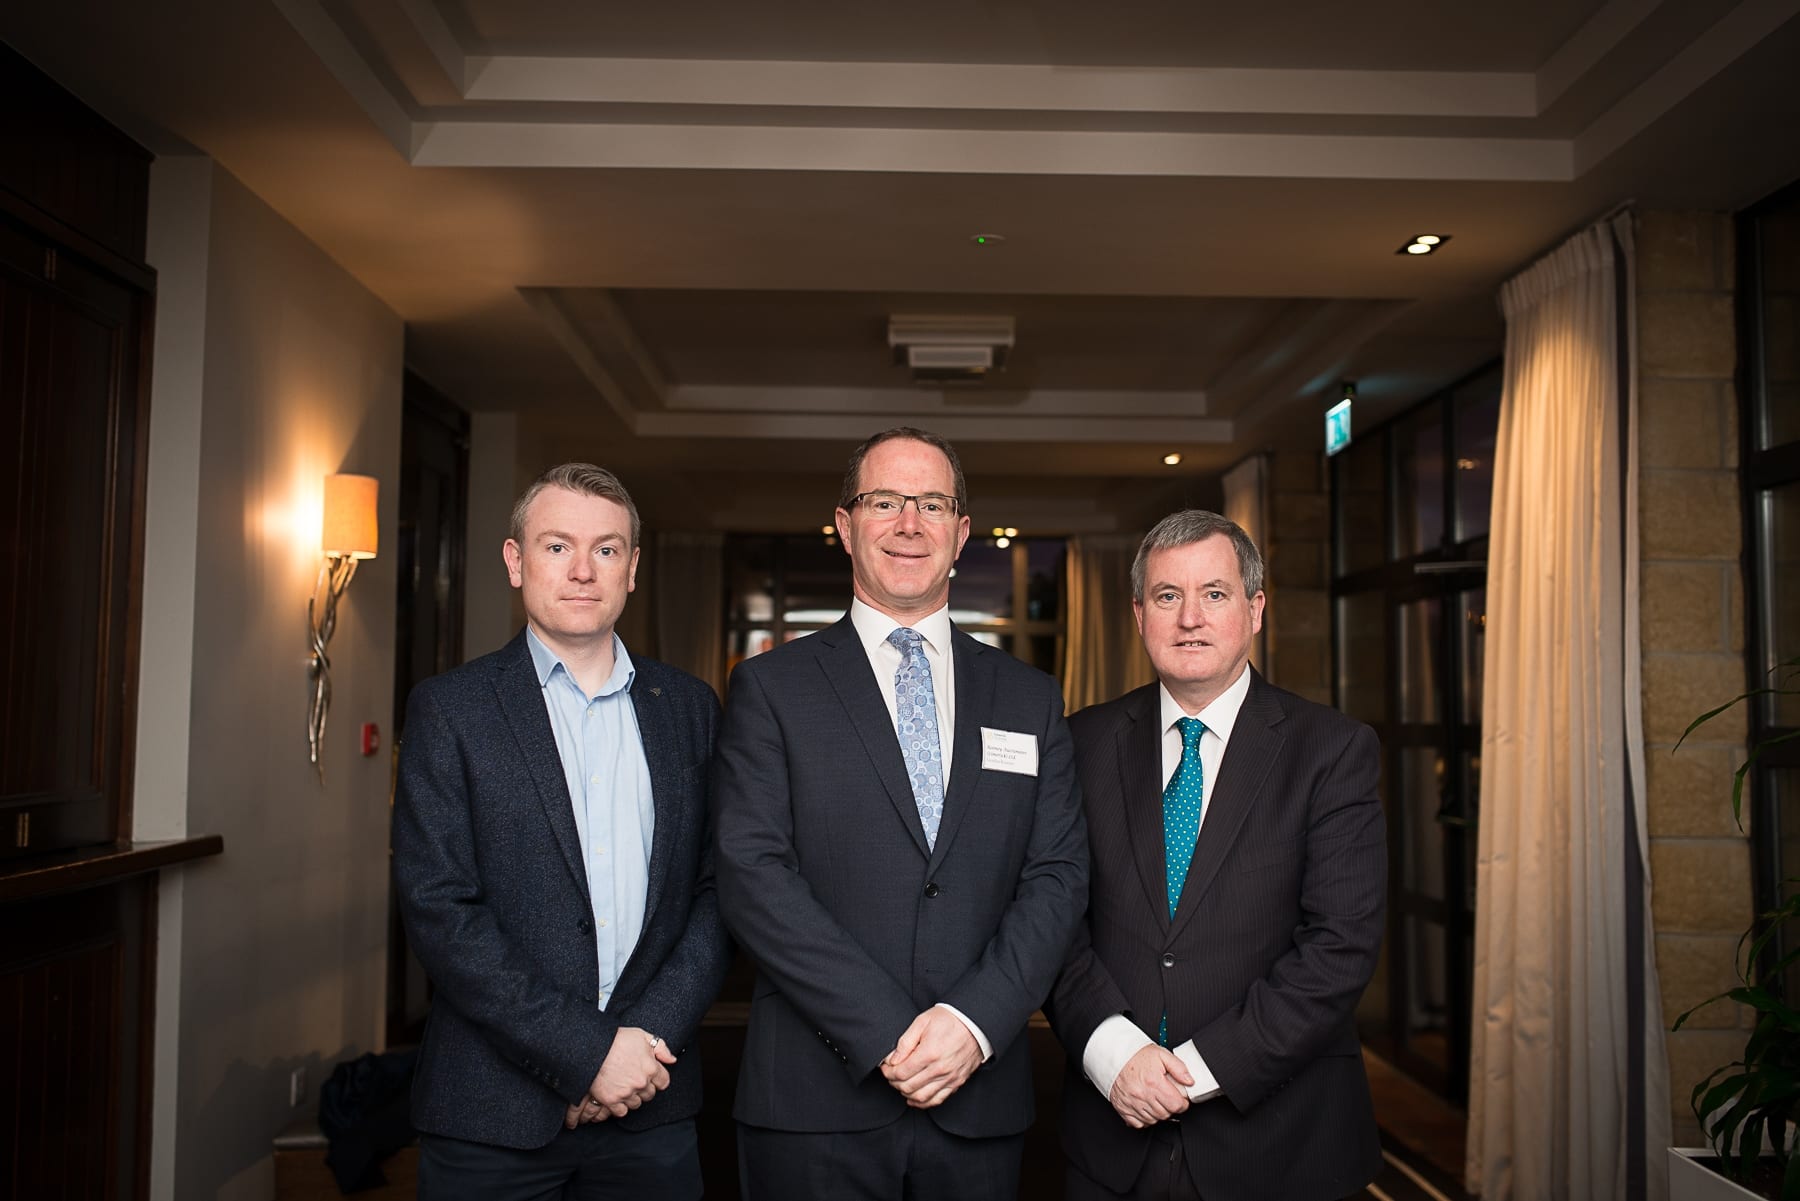 Economic Breakfast Briefing; European and Local Economic Outlook In association with the Limerick Post which took place in the Castletroy Park Hotel on Monday 11th Feb 2019:  From left to right: Philip Stack - Arup, Gordan Kearney - Rooney Auctioneers, Senator Kieran O’Donnell. 
 Image by Morning Star Photography